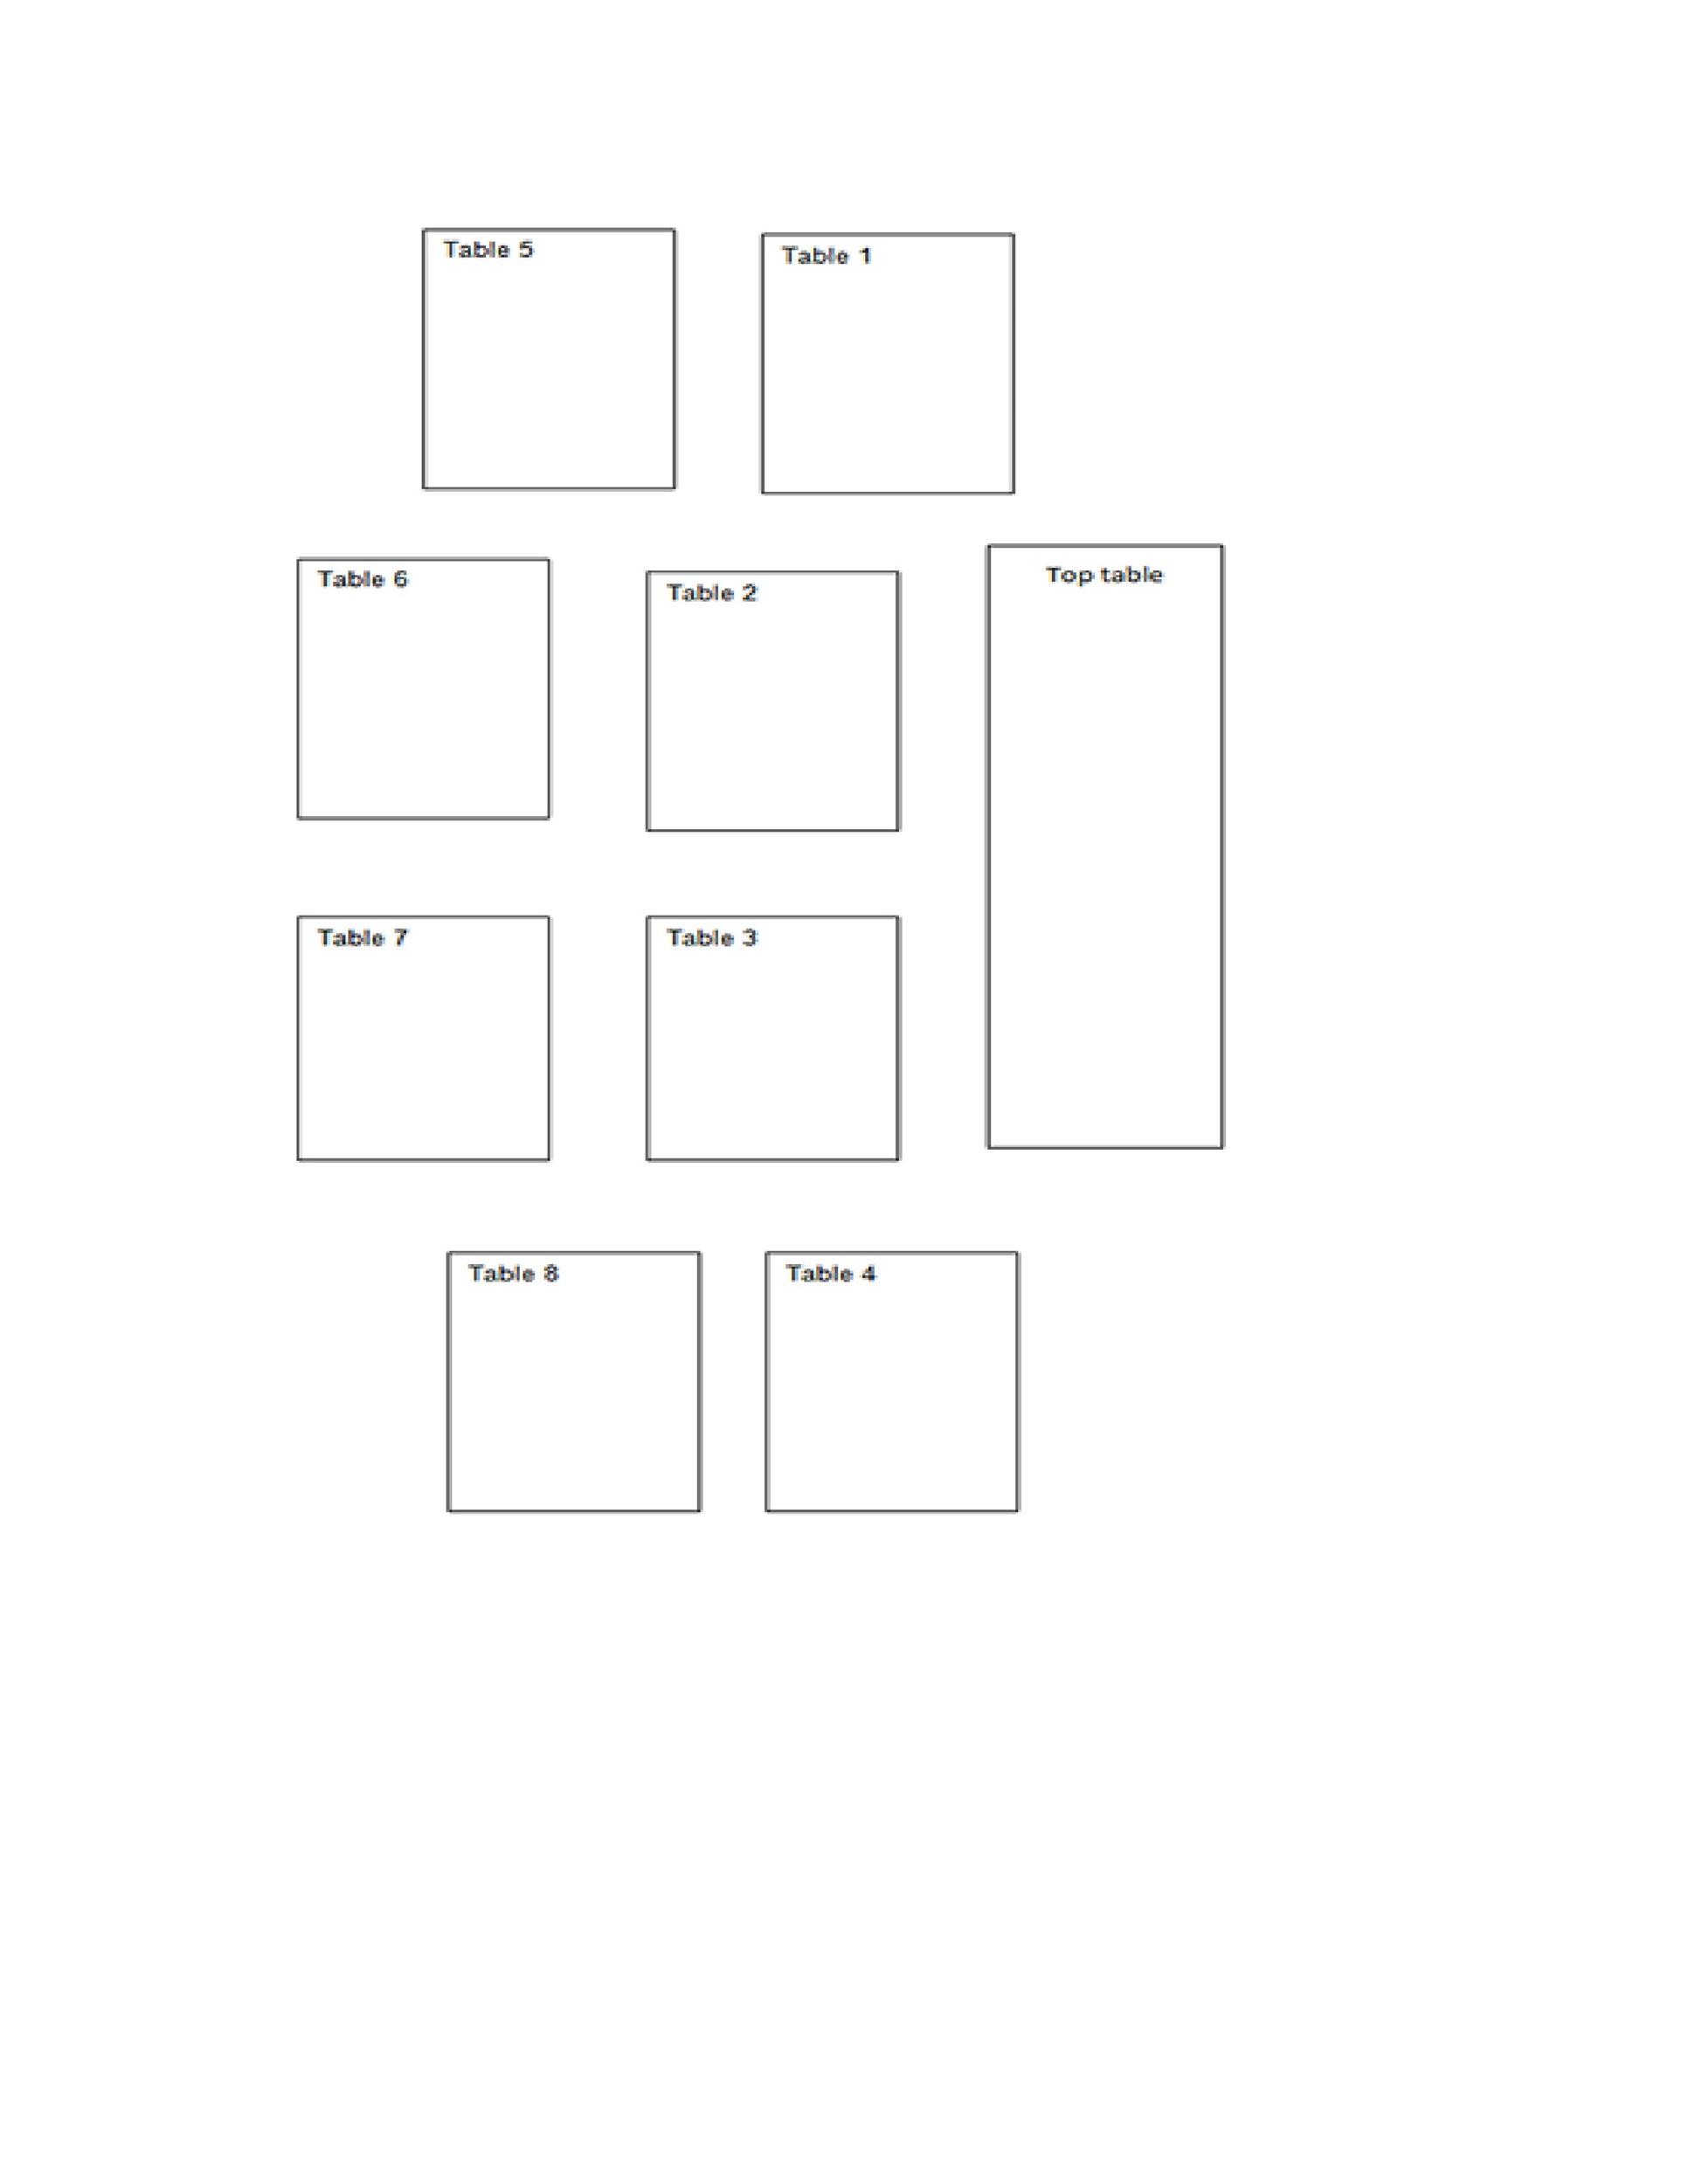 Dinner Party Seating Chart Template